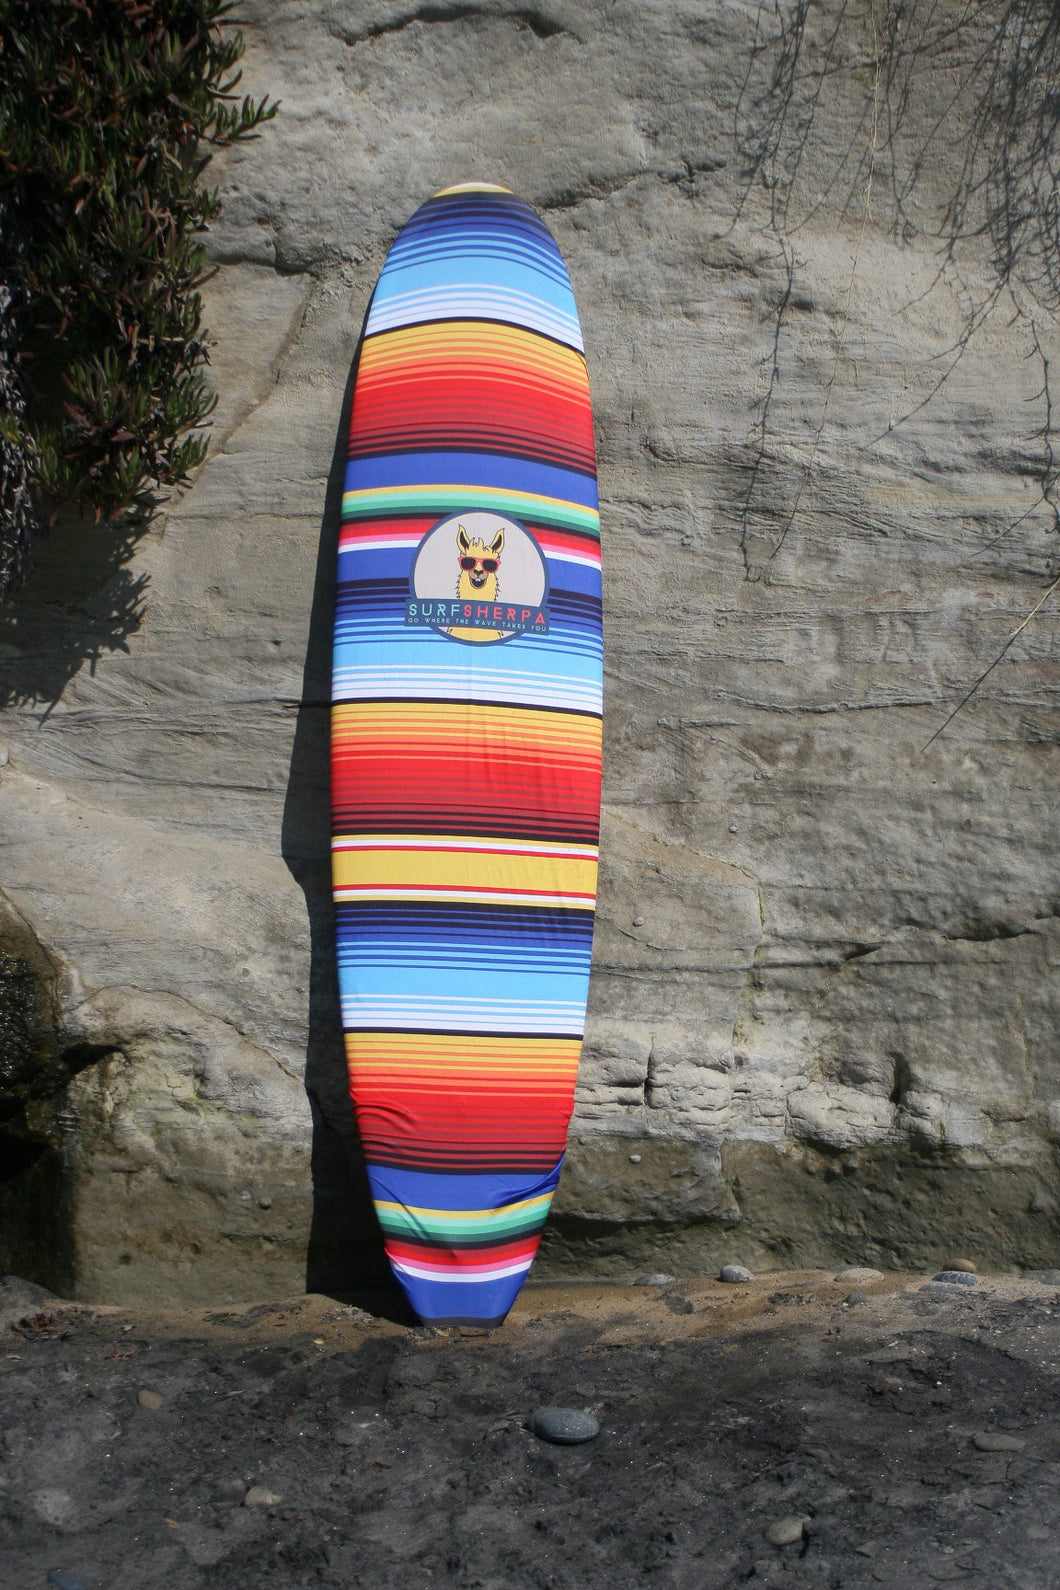 The Surf Sherpa 